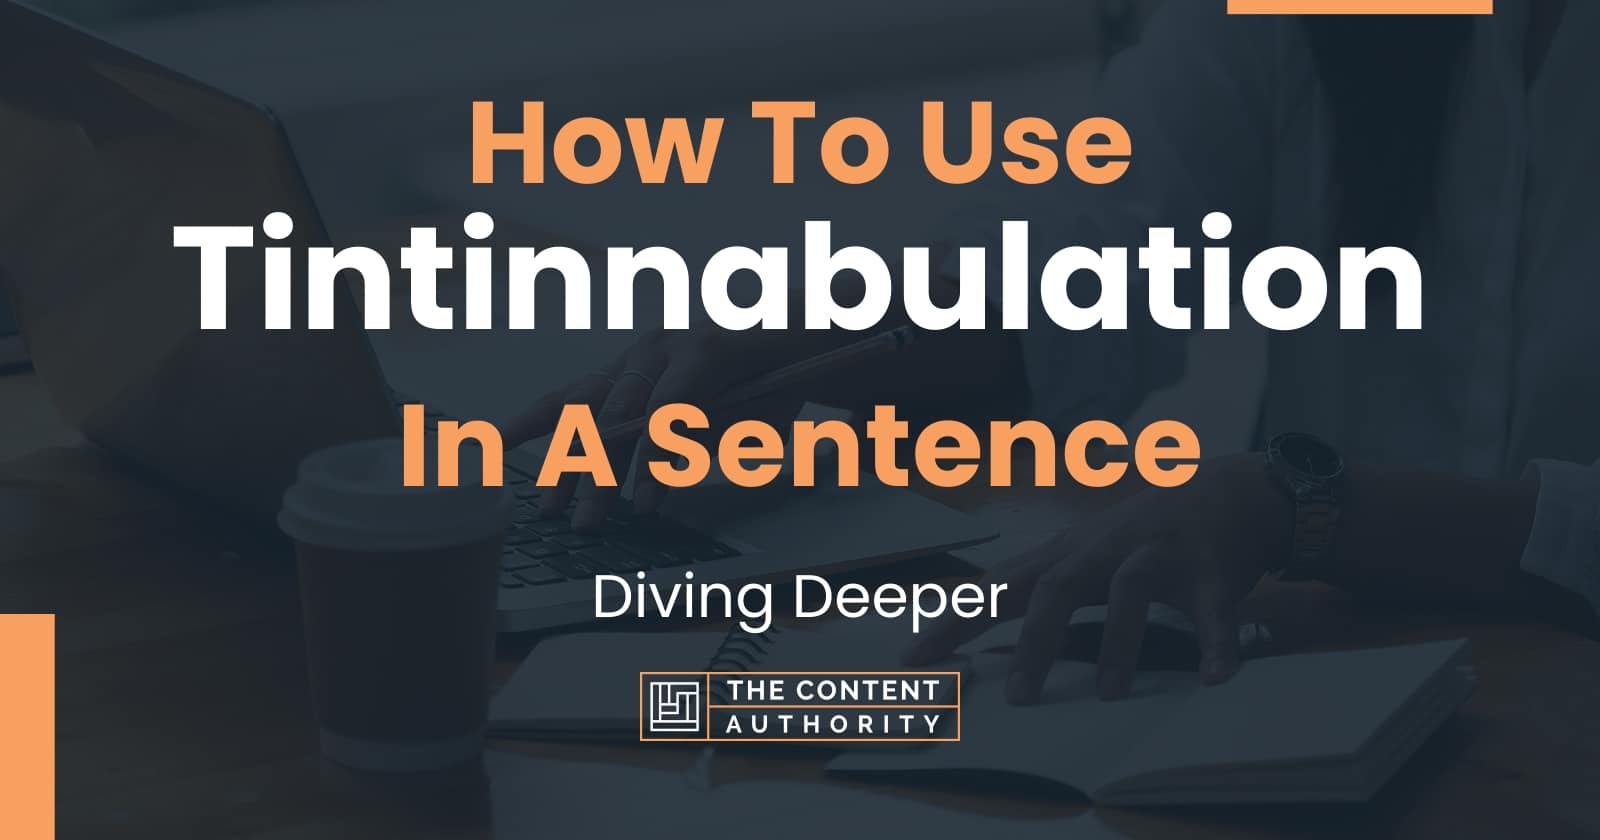 How To Use Tintinnabulation In A Sentence 